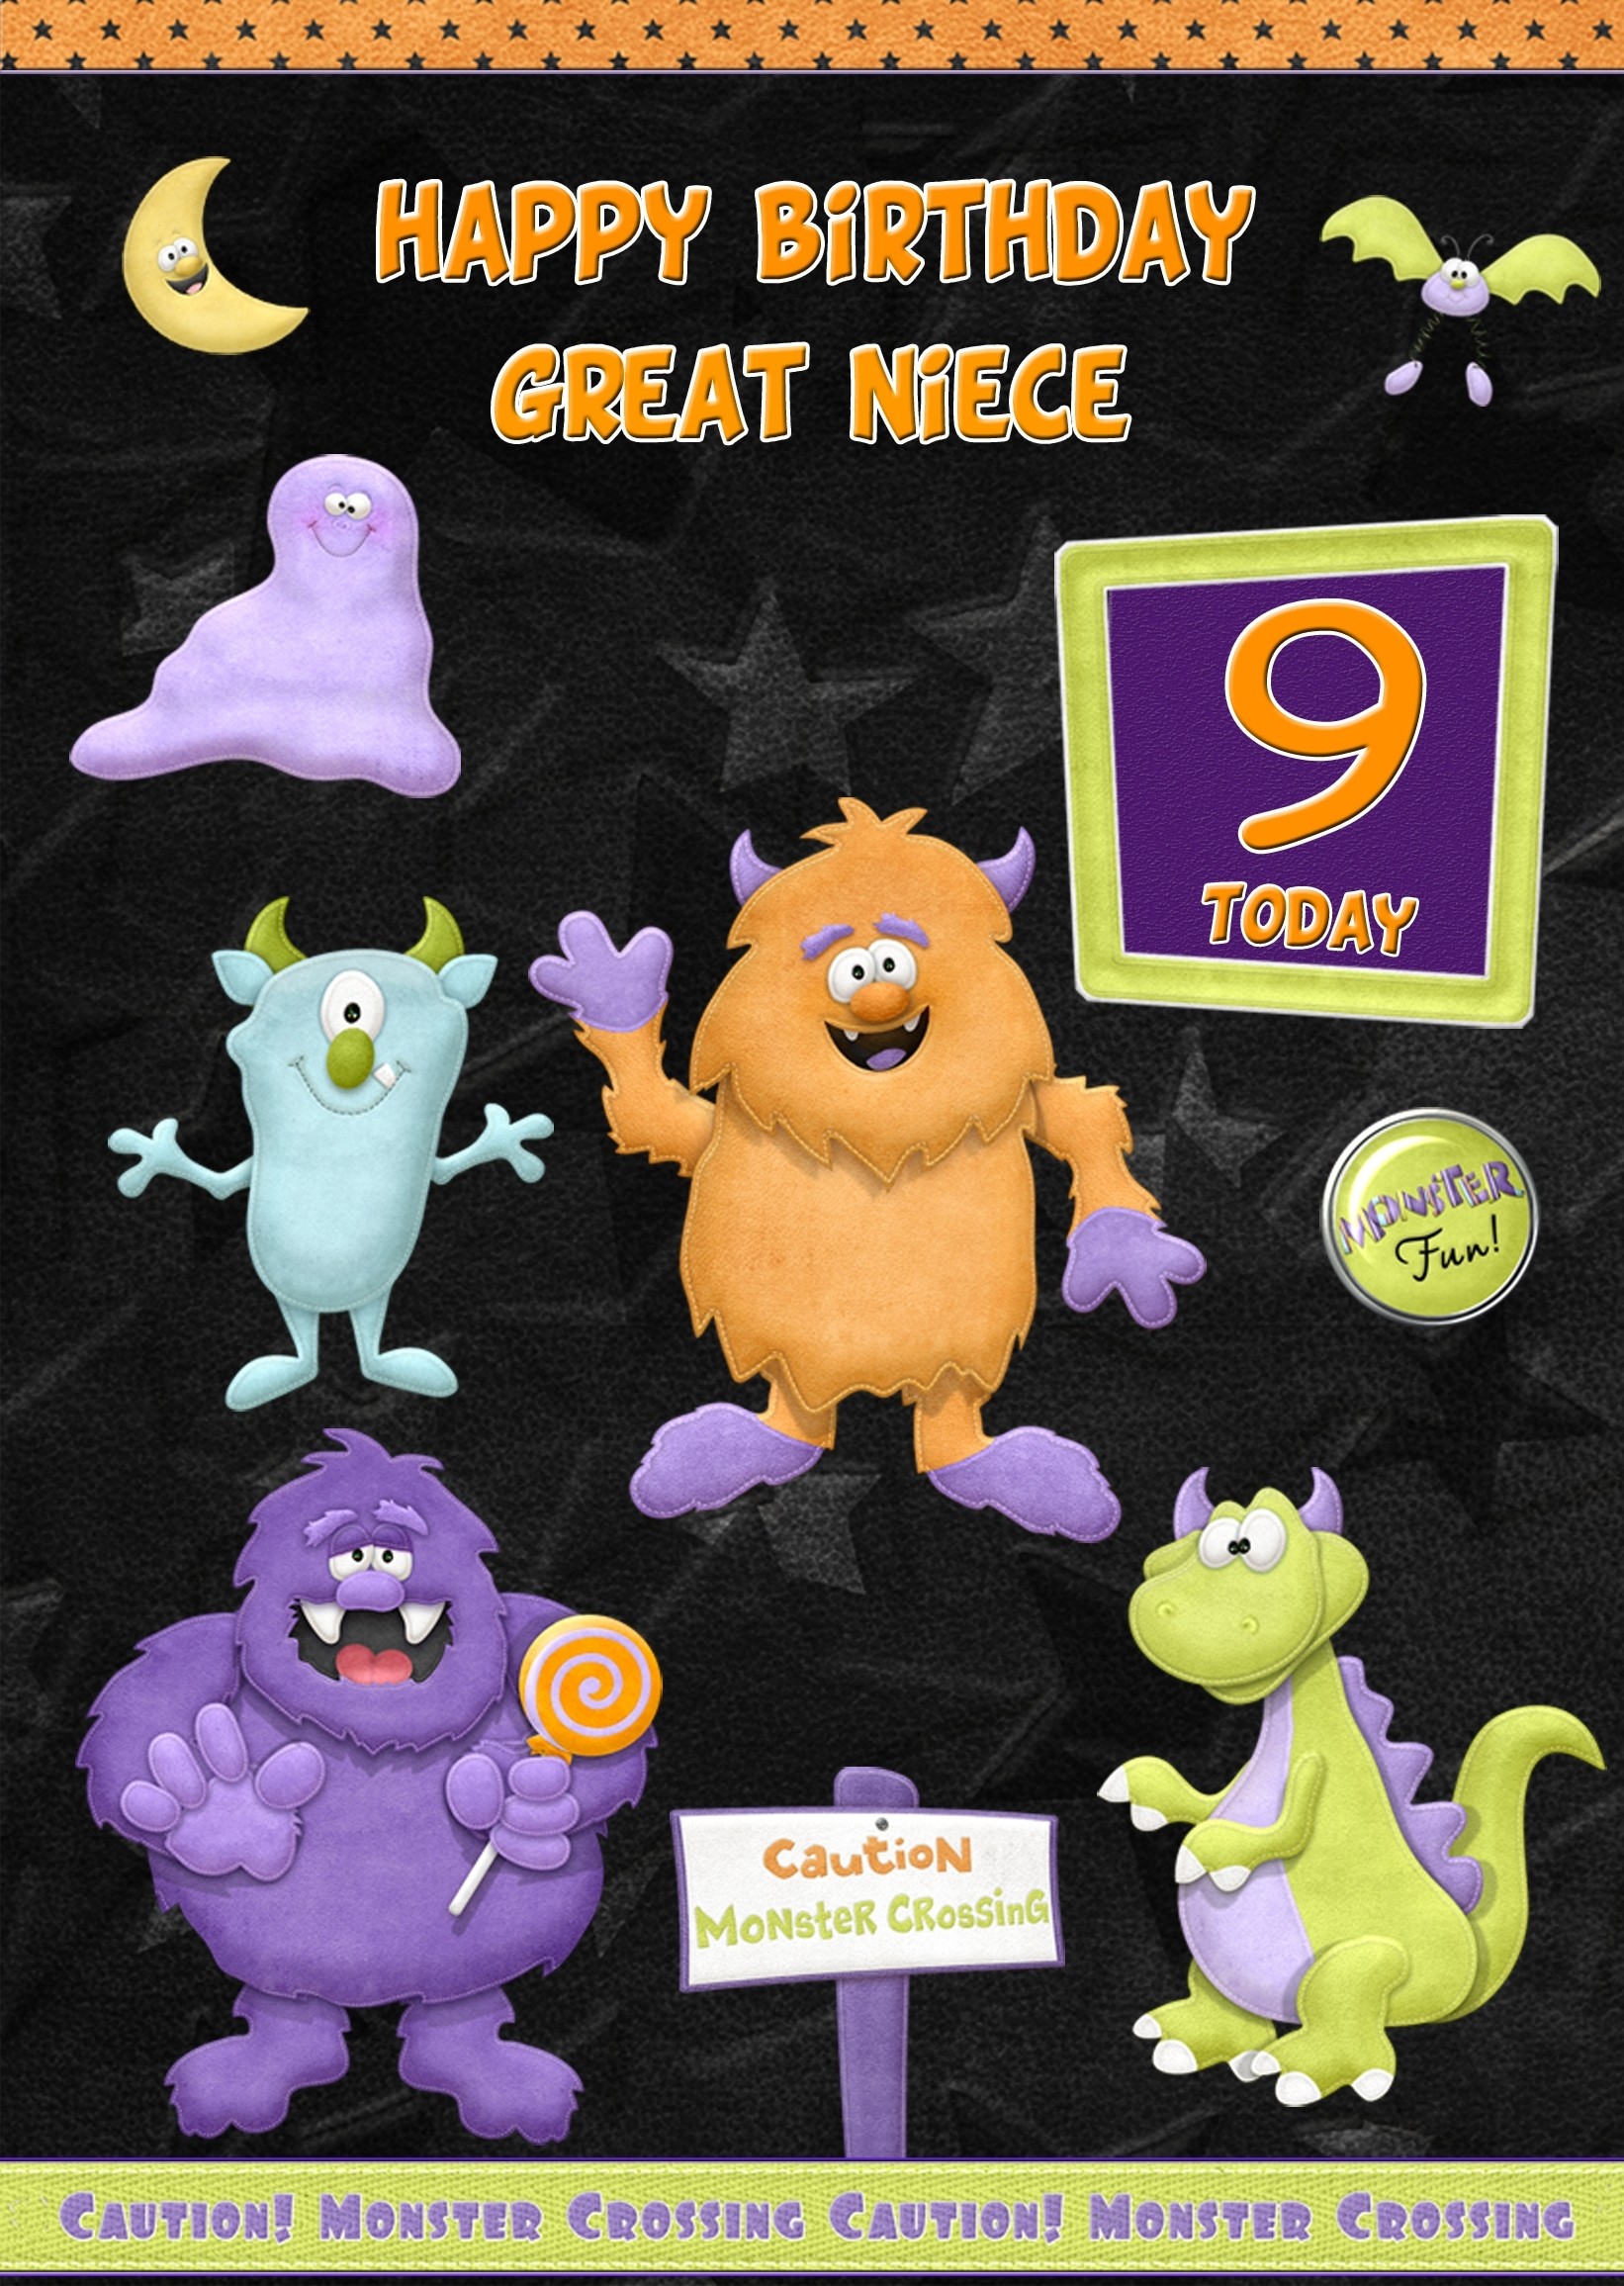 Kids 9th Birthday Funny Monster Cartoon Card for Great Niece